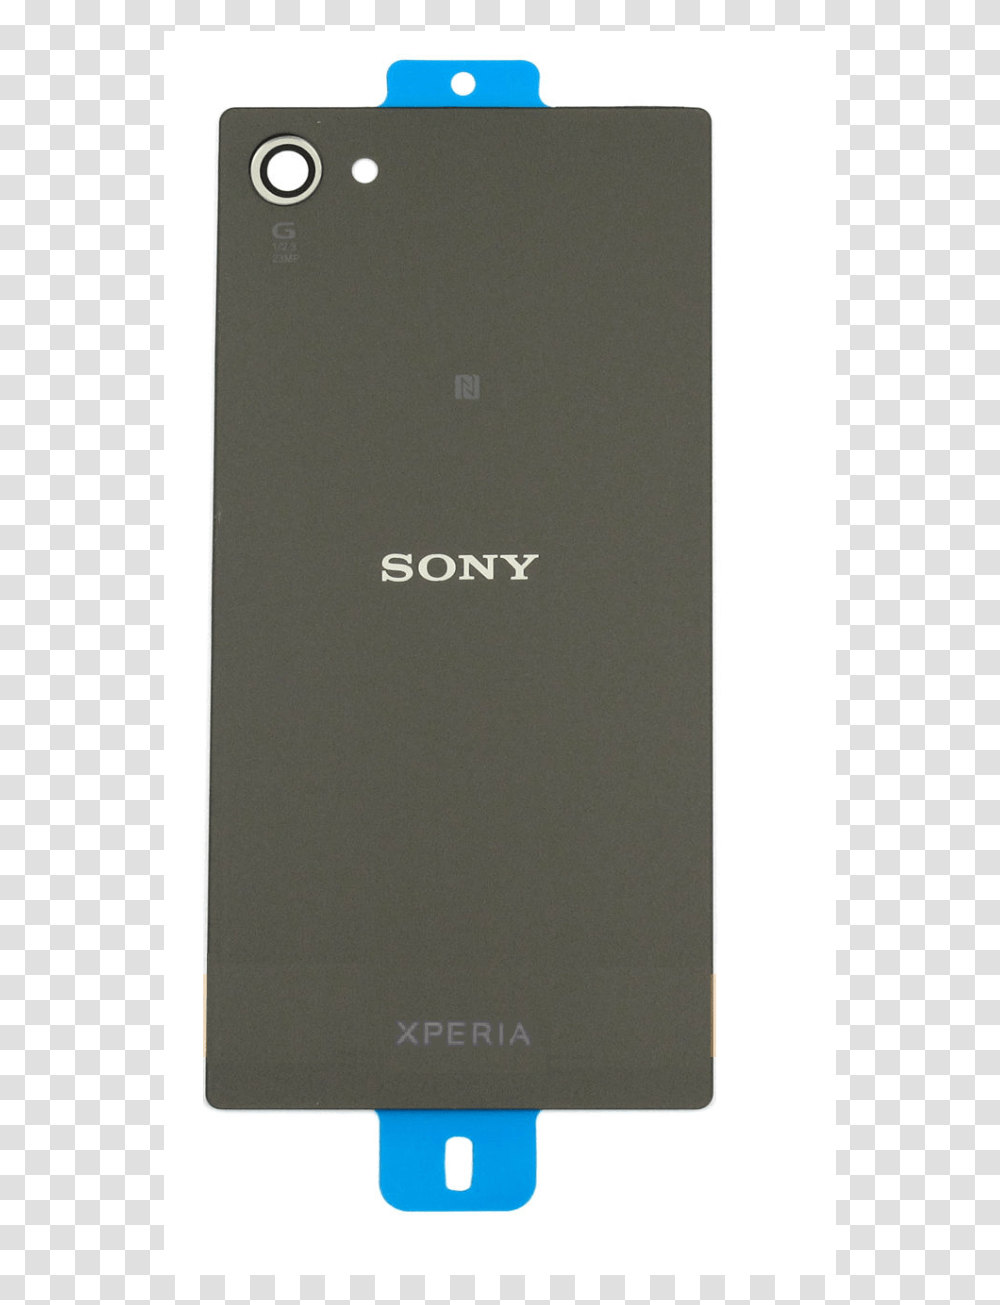 Sony Xperia Z5 Compact Battery Cover Rear Glass Panel Smartphone, Mobile Phone, Electronics, Cell Phone Transparent Png